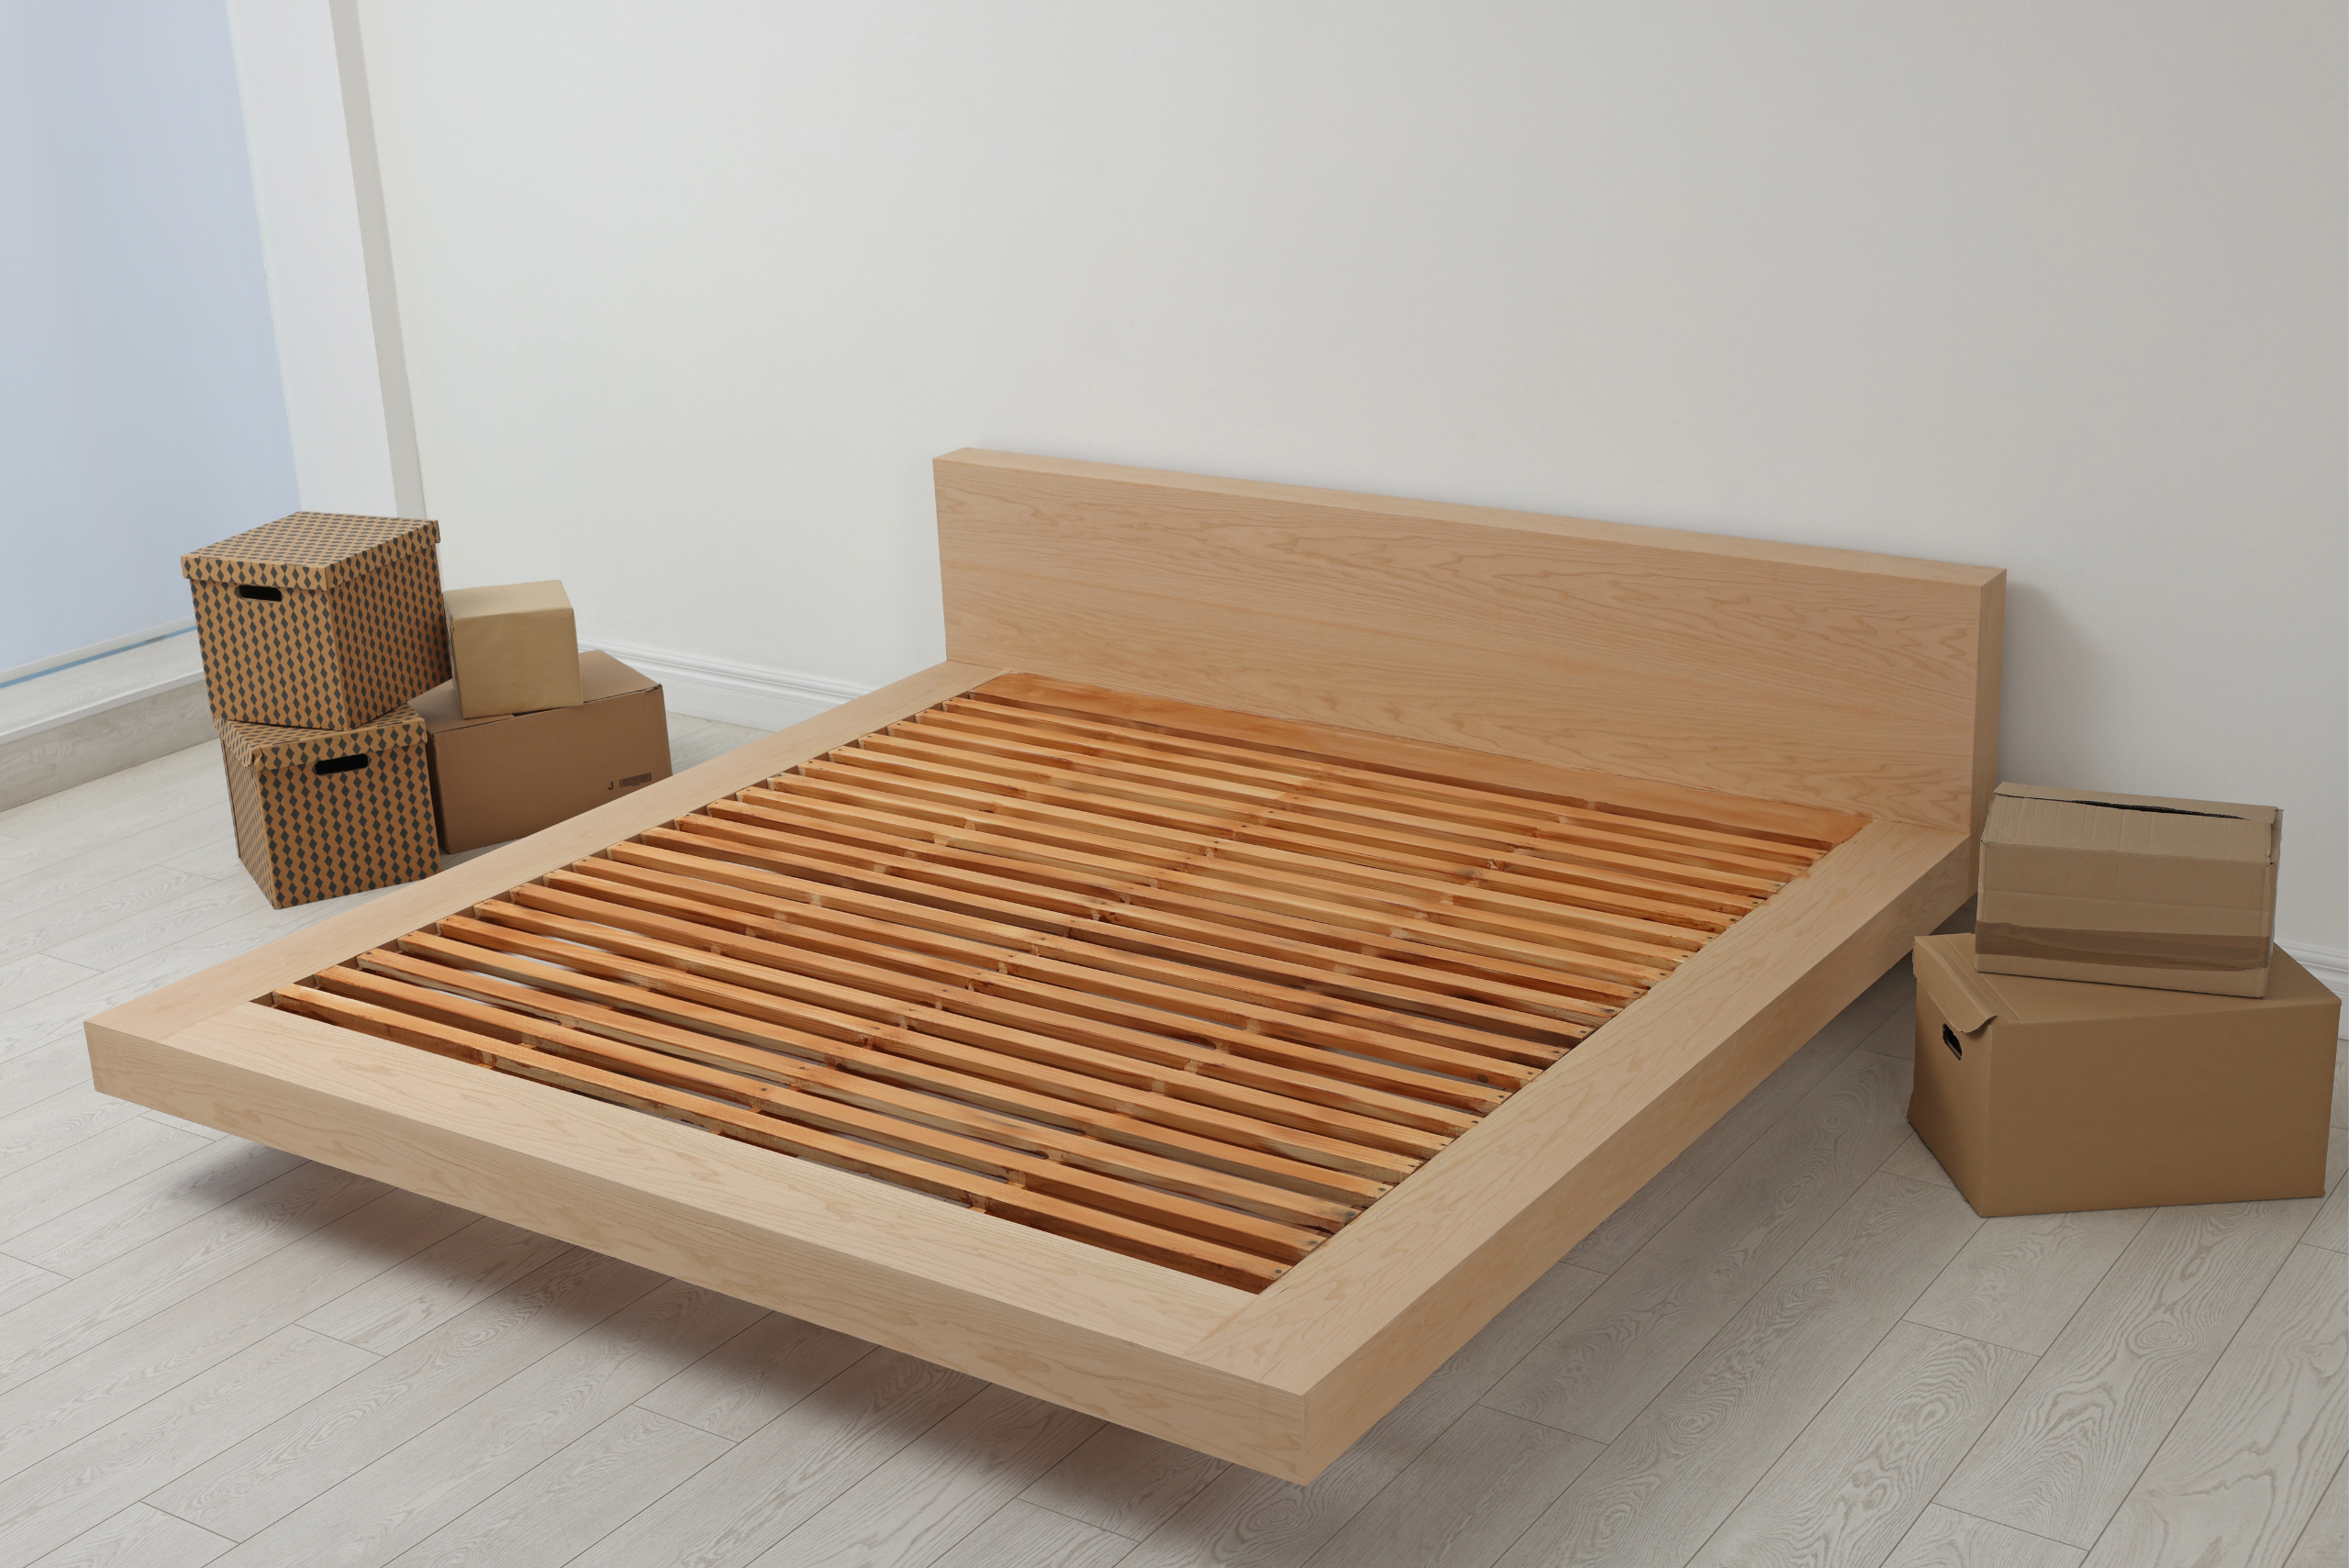 Wooden bed frame surrounded by boxes.